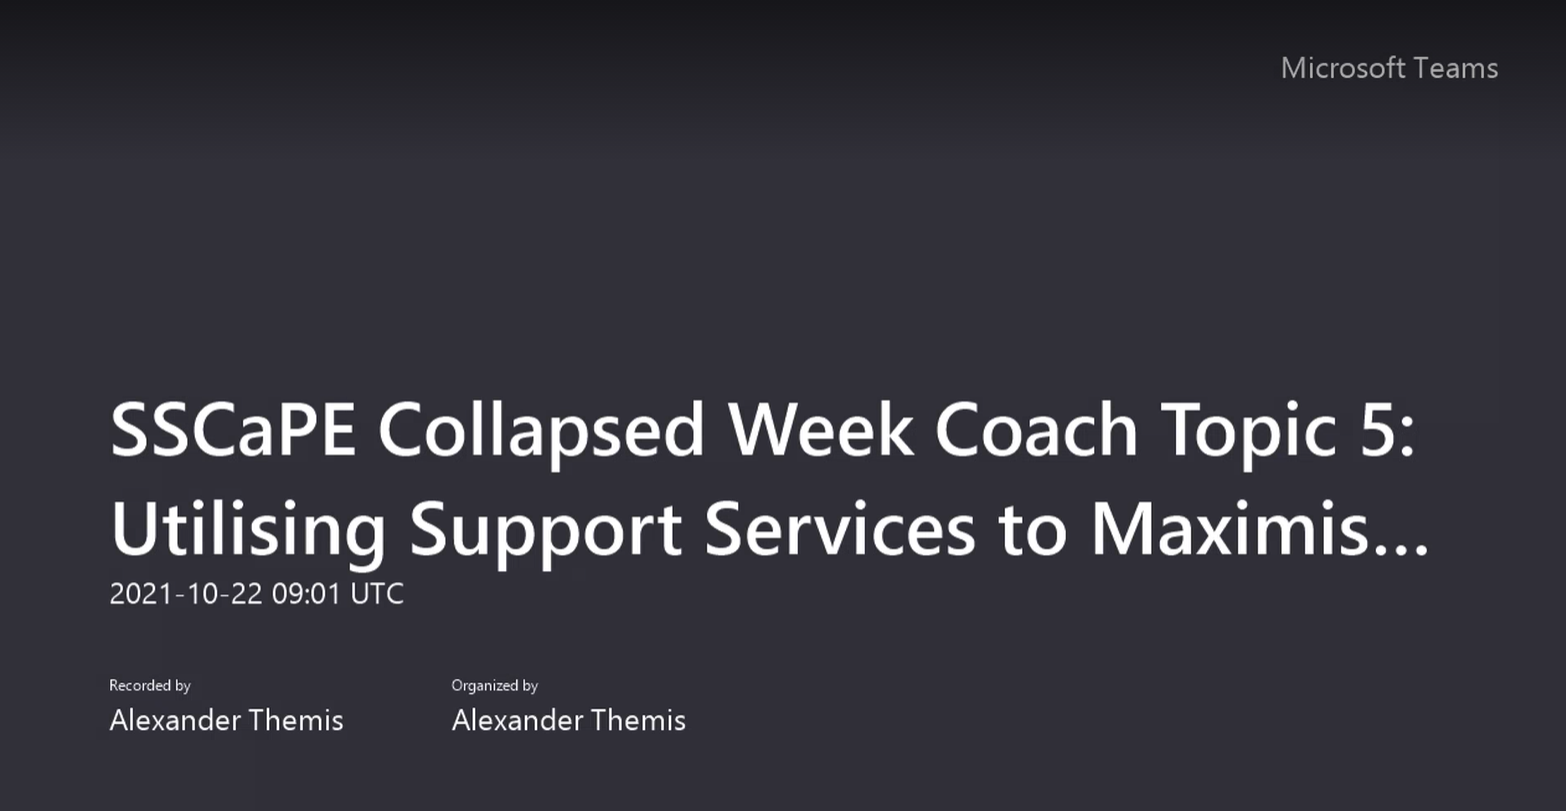 SSCaPE Collapsed Week Coach Topic 5: Utilising Support Services to Maximis... 2021 - 10-22 09:01 UTC. Recorded by Alexander Themis. Organised by Alexander Themis